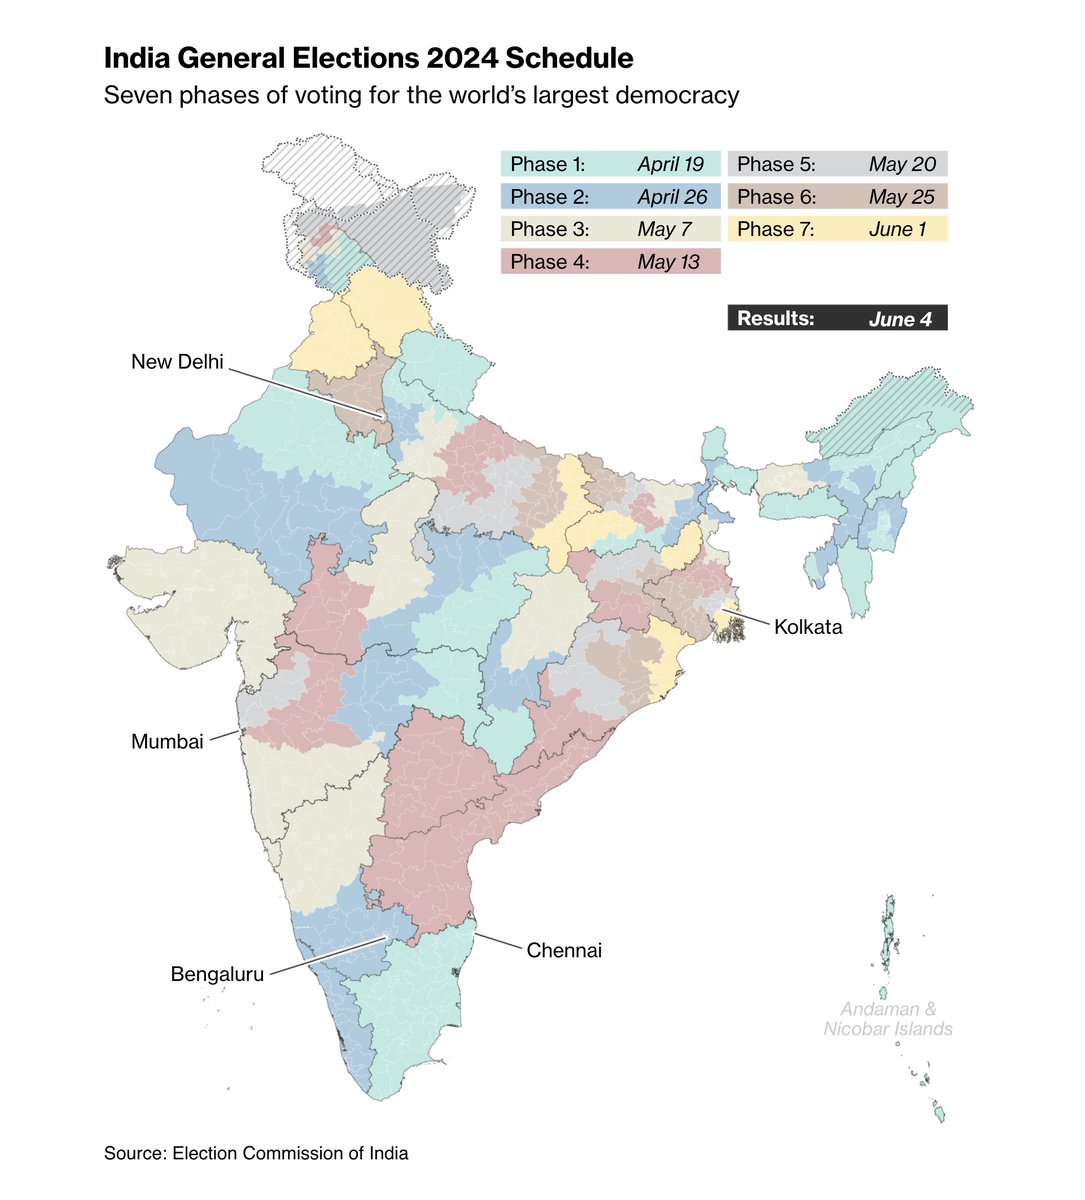 The election campaign in India is heating up, both in temperatures and rhetoric. Here's how voting in Mangaluru will test development against Prime Minister Modi’s Hindutva push. 🔗🇮🇳🗳: bloomberg.com/news/articles/…